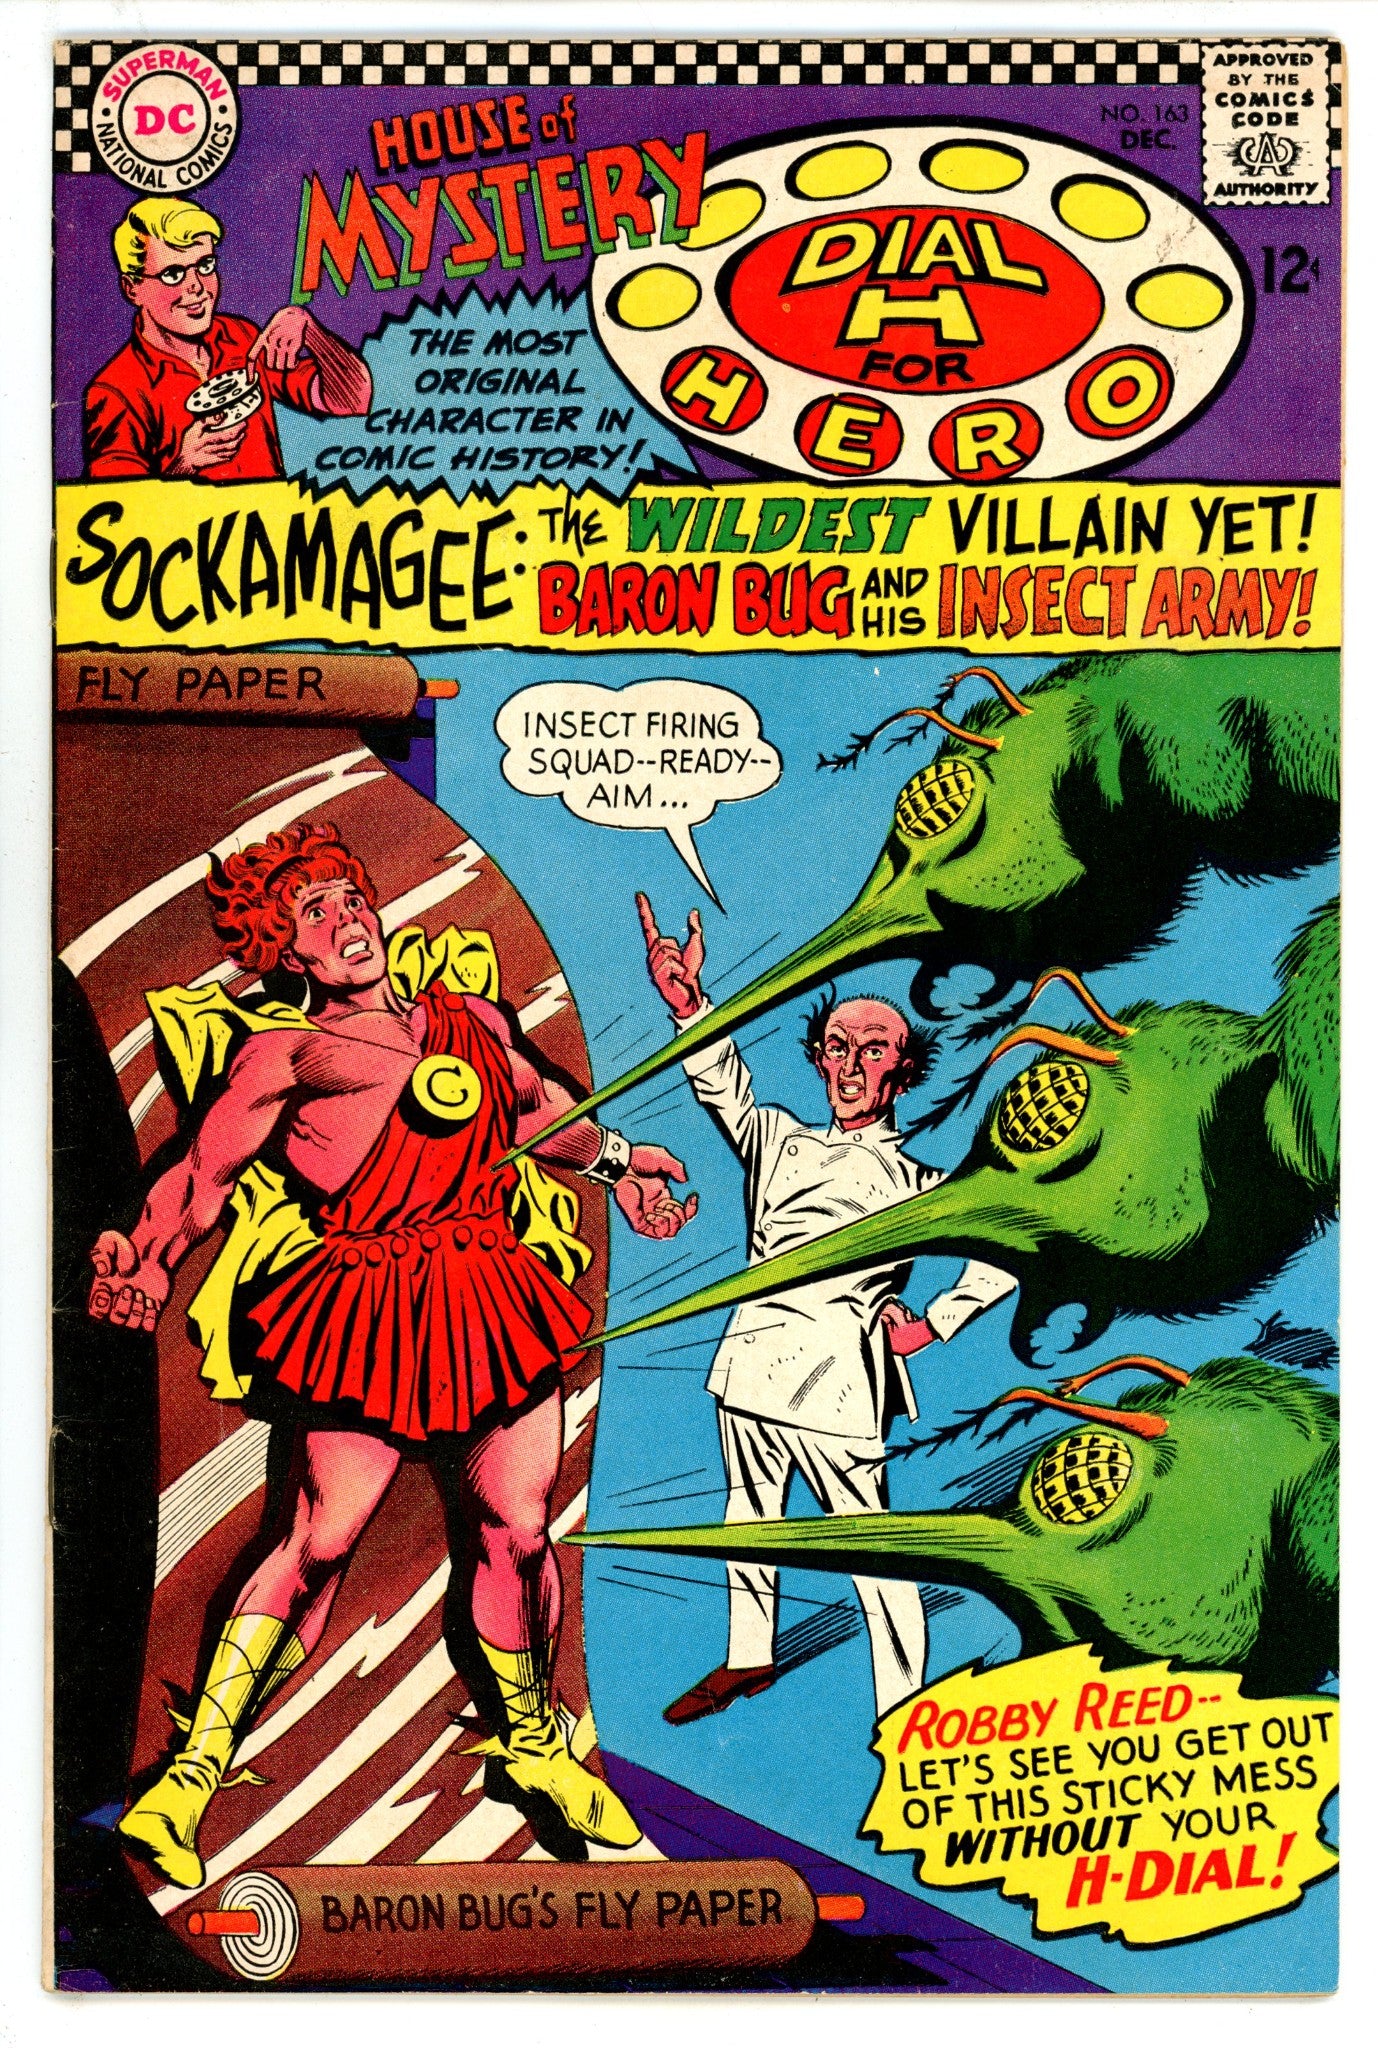 House of Mystery Vol 1 163 FN+ (6.5) (1966) 